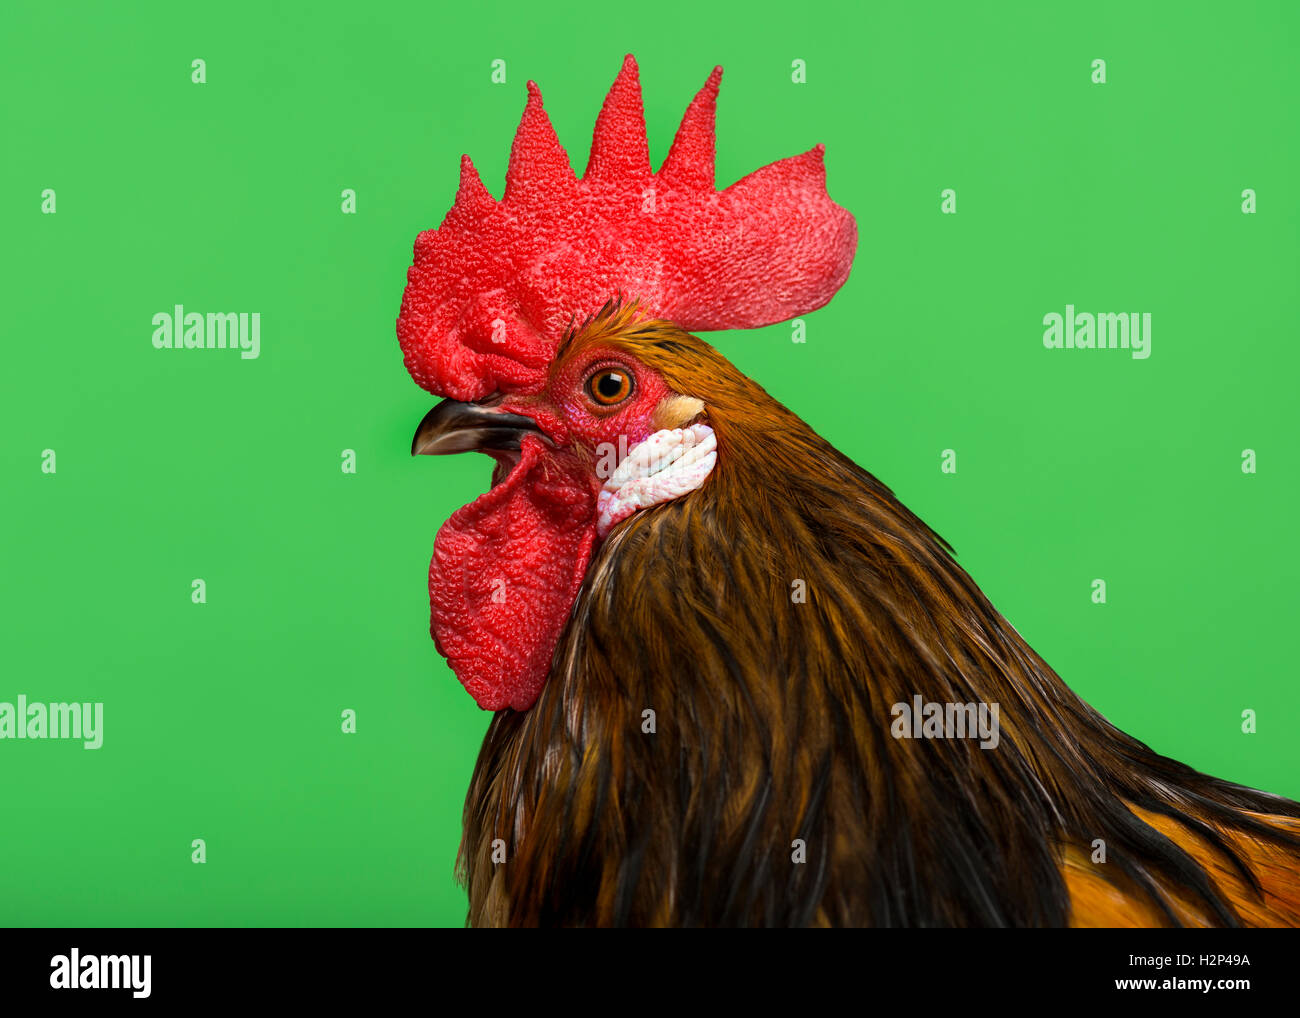 Cose-up of a Bassette rooster against green background Stock Photo